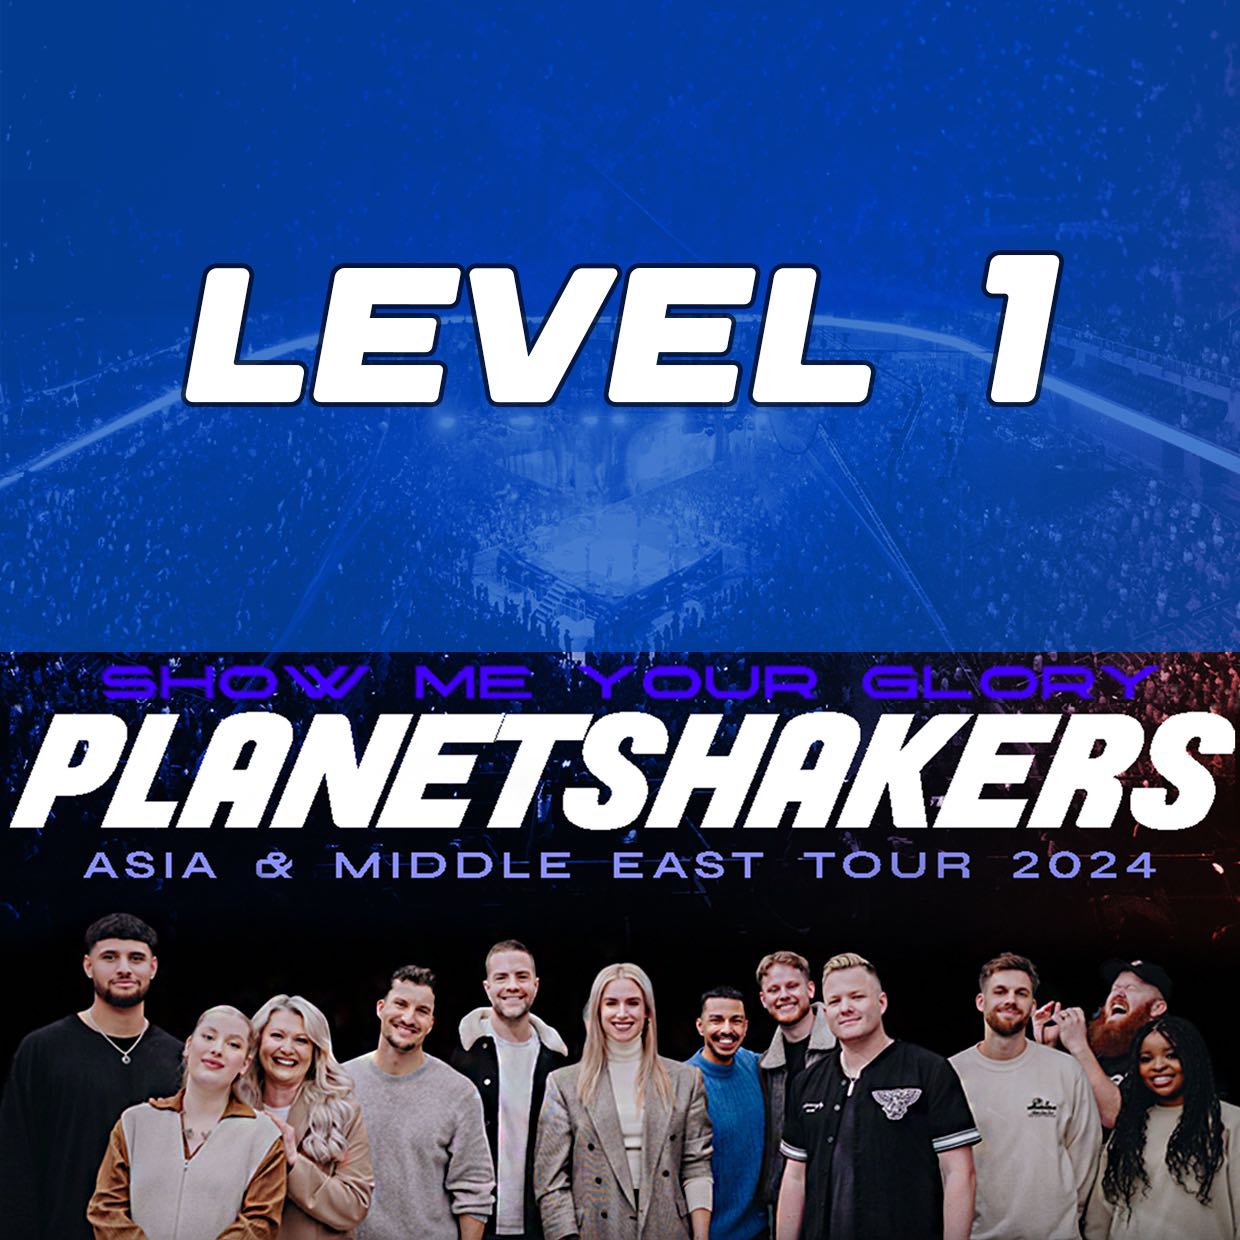 PLANETSHAKERS “SHOW ME YOUR GLORY” 2023 TOUR - DAY 1 @Planetshakers #s